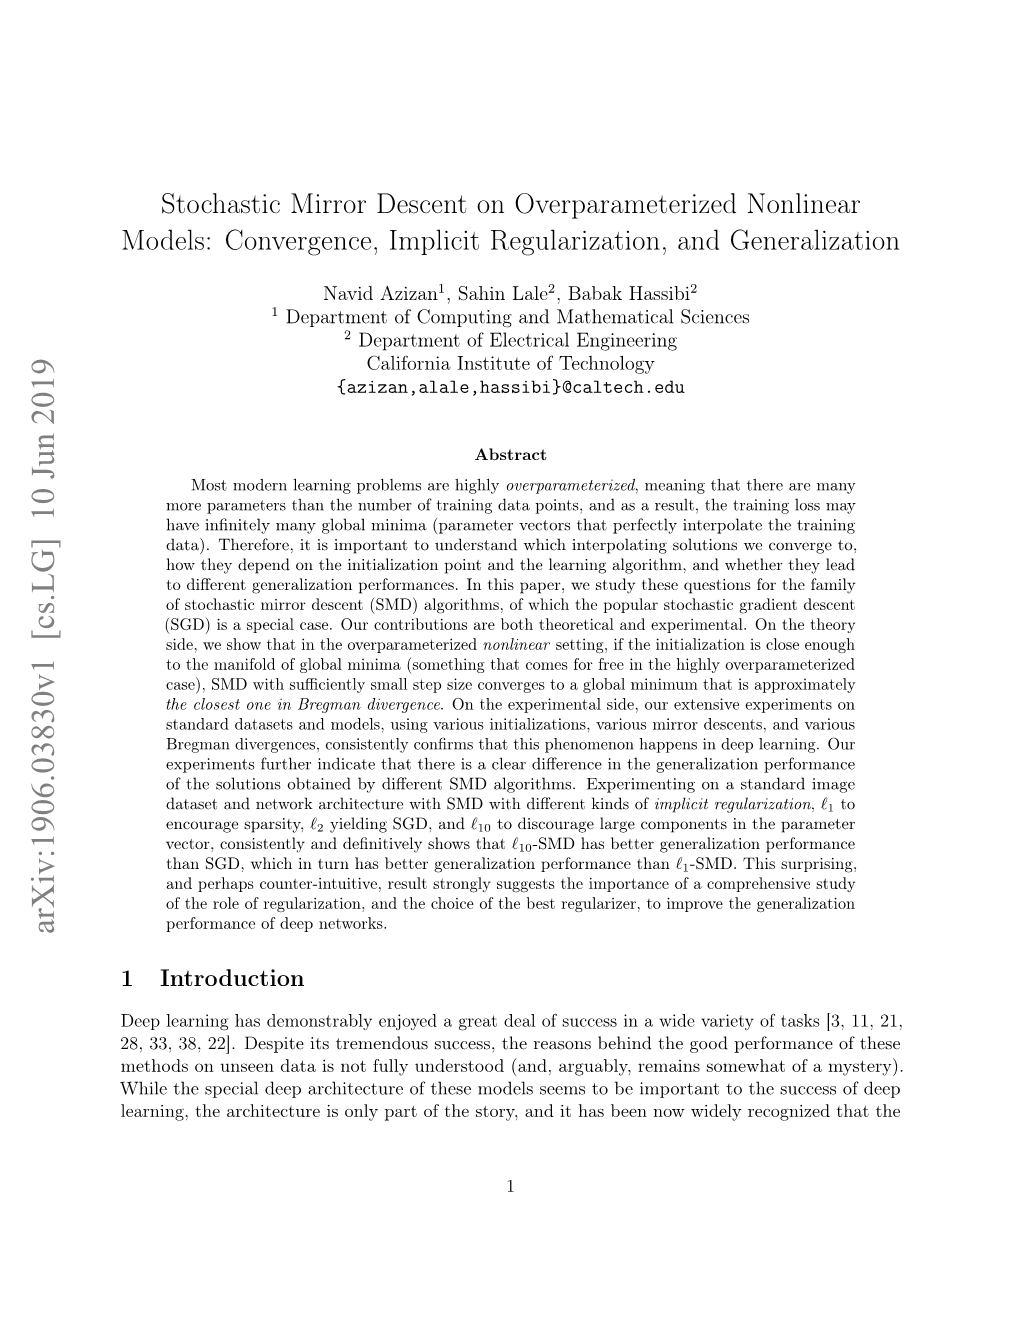 Stochastic Mirror Descent on Overparameterized Nonlinear Models: Convergence, Implicit Regularization, and Generalization